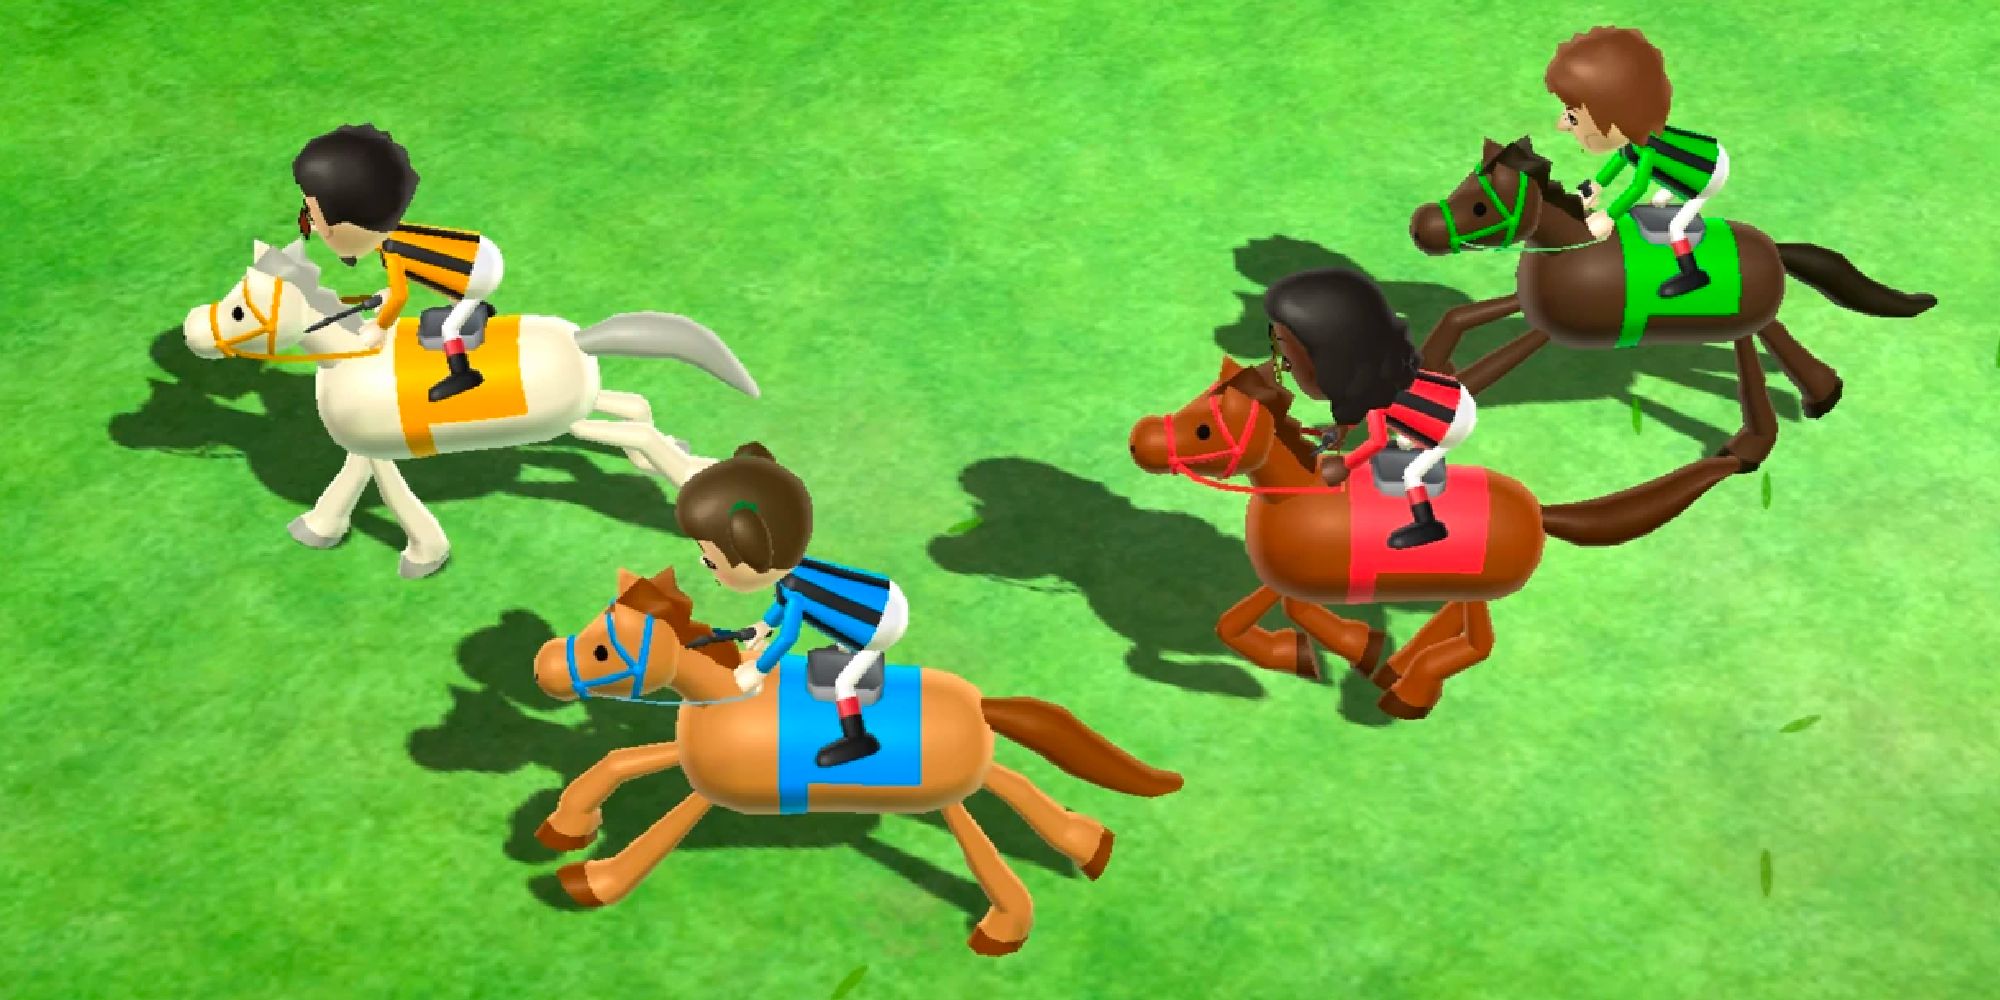 A minigame in Wii Party where Miis ride on different colored horses